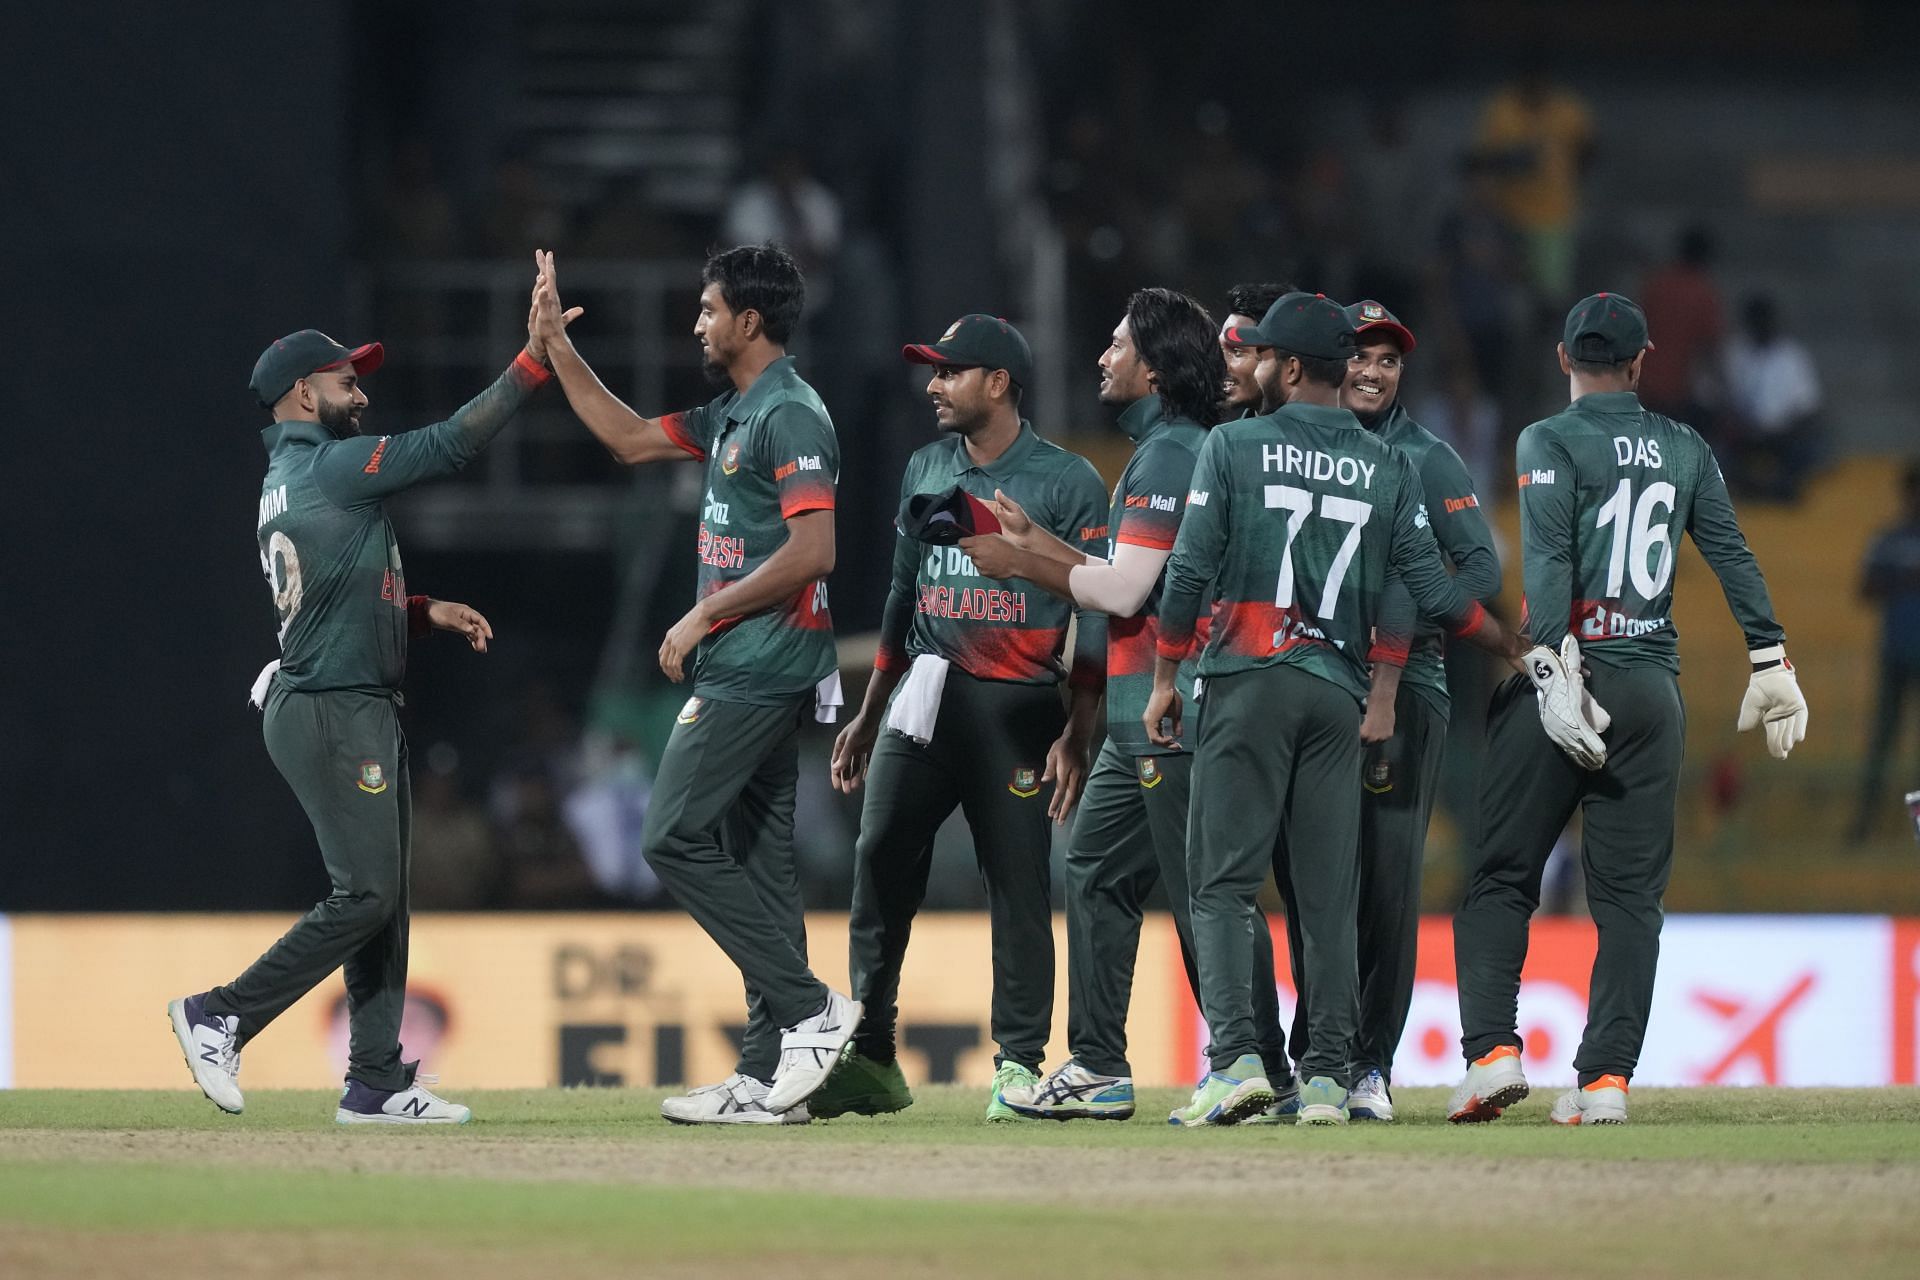 Bangladesh cricket team during the Asia Cup. (Pic: AP)